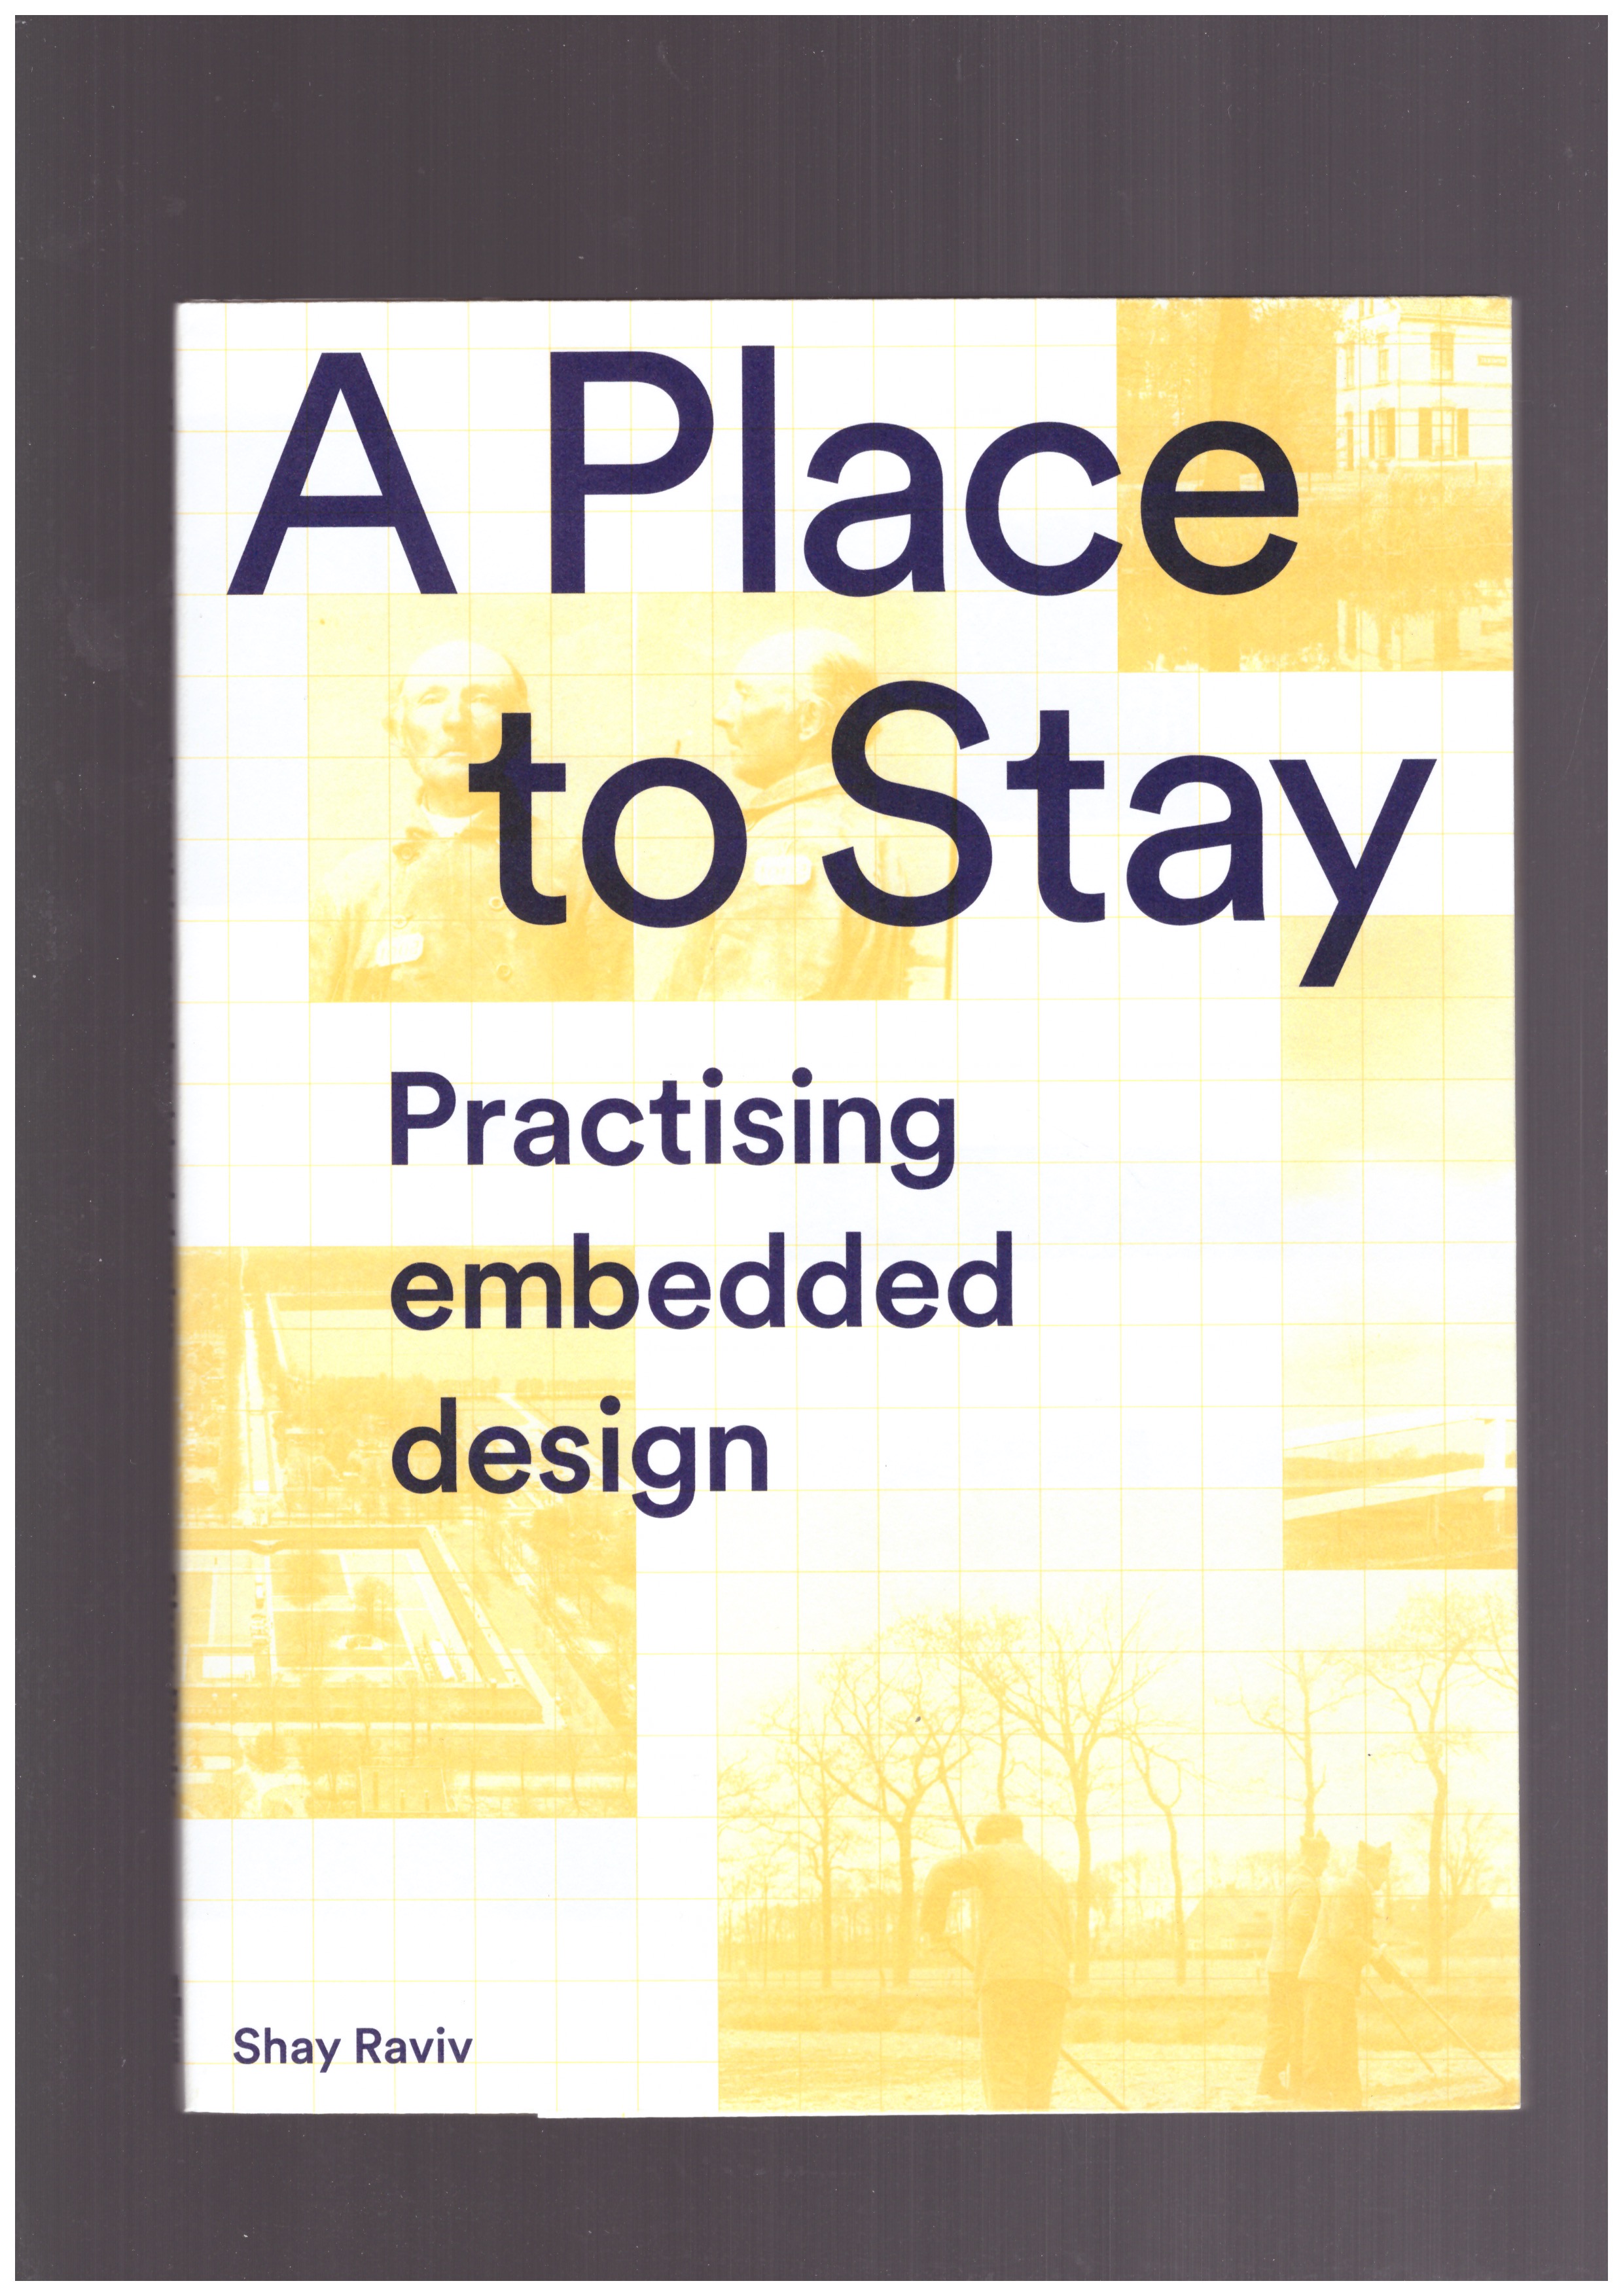 RAVIV, Shay   - A place to stay : Practising embedded design